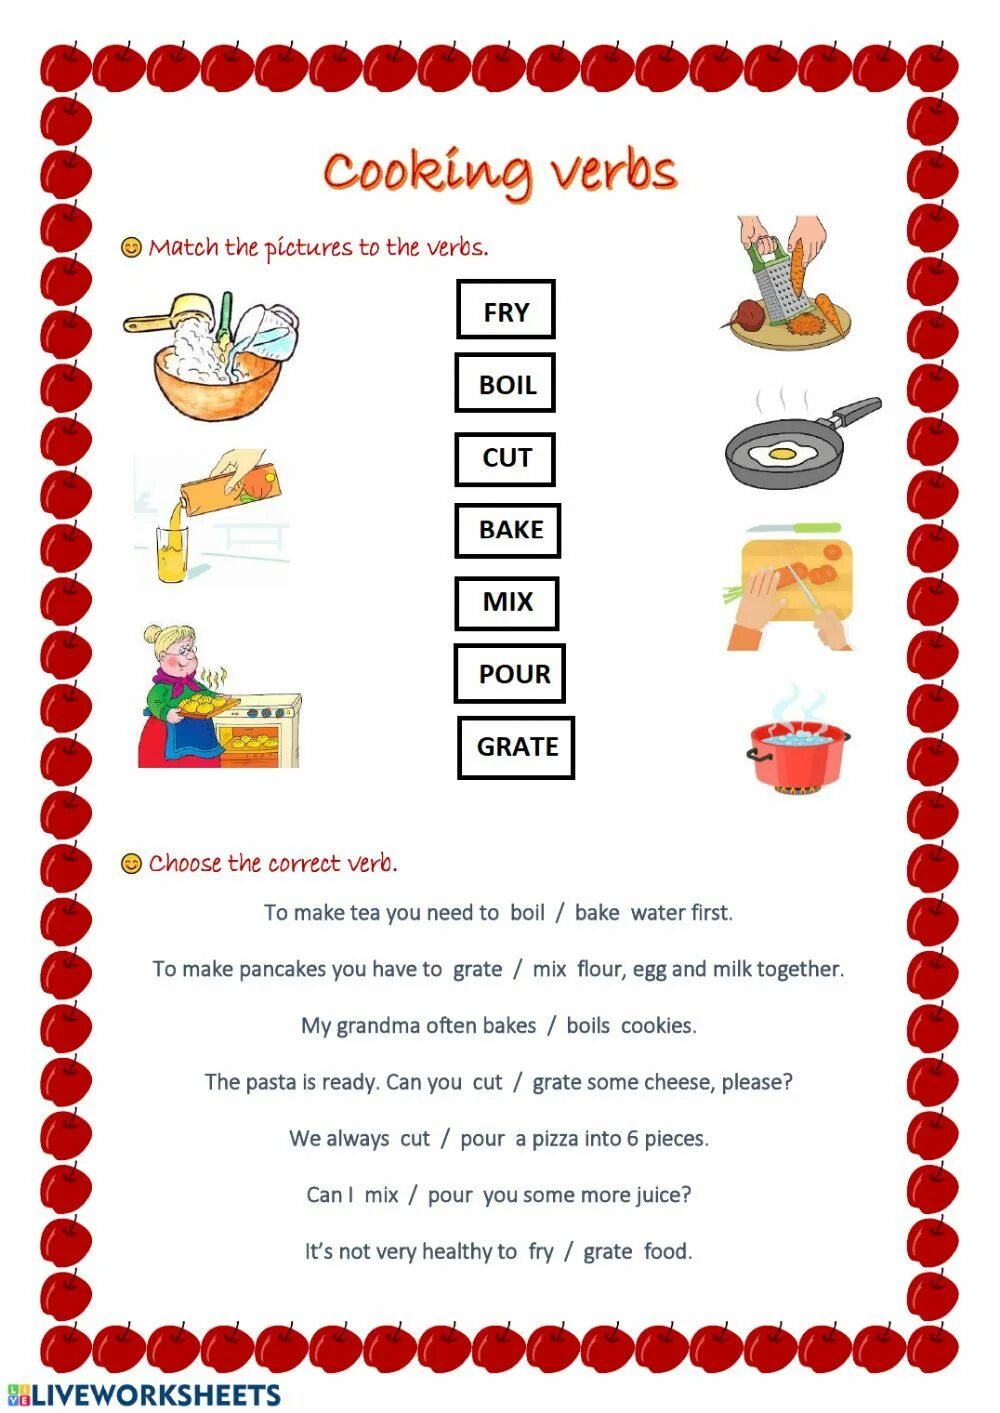 Food and Cooking Worksheets. Cooking verbs. Cooking Vocabulary for Kids. Vocabulary food and Cooking.